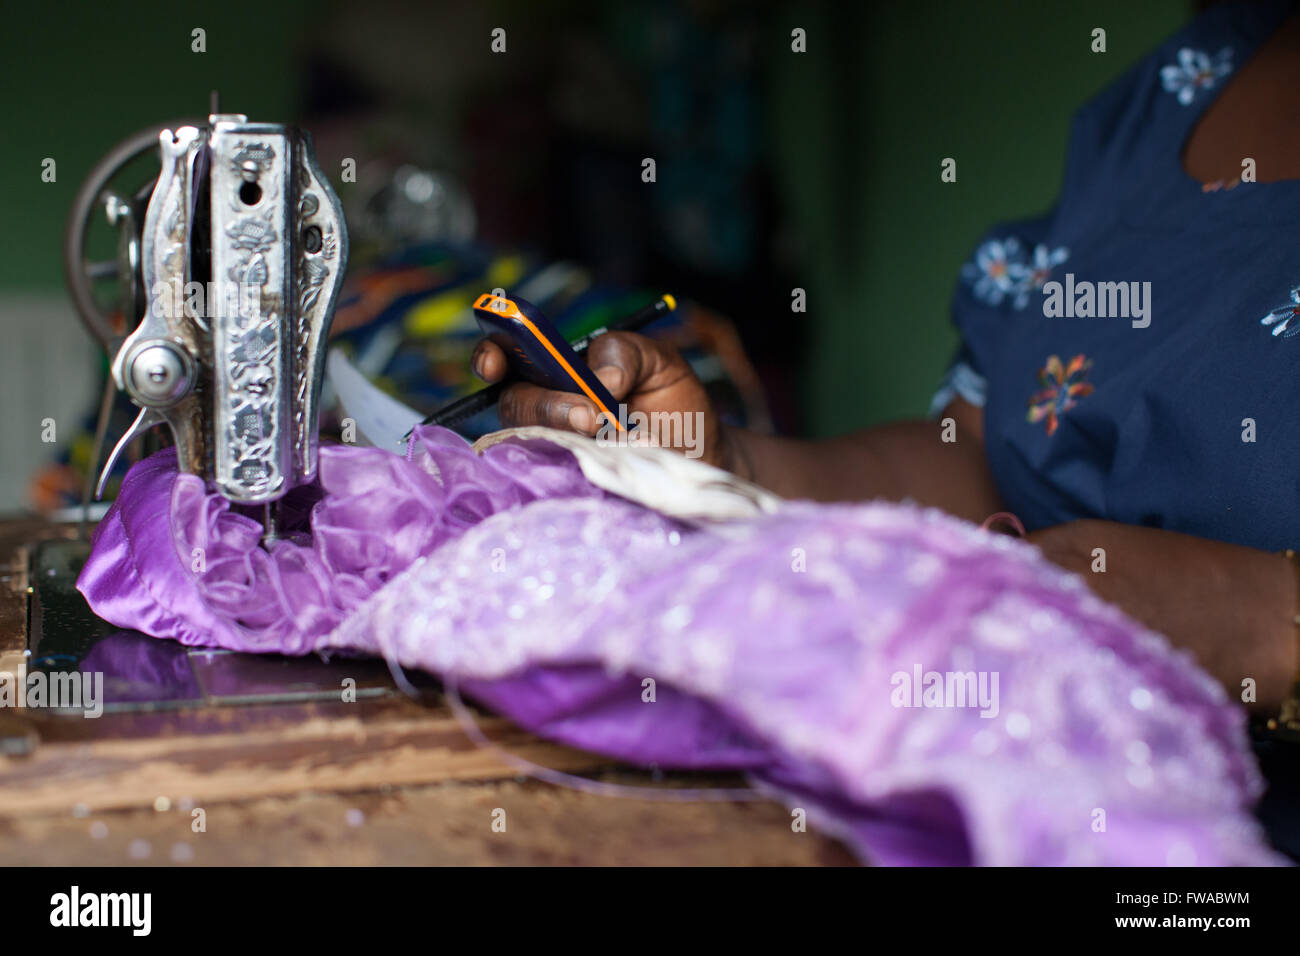 A female dress maker using a sewing machine and mobile phone, Nigeria, Africa Stock Photo